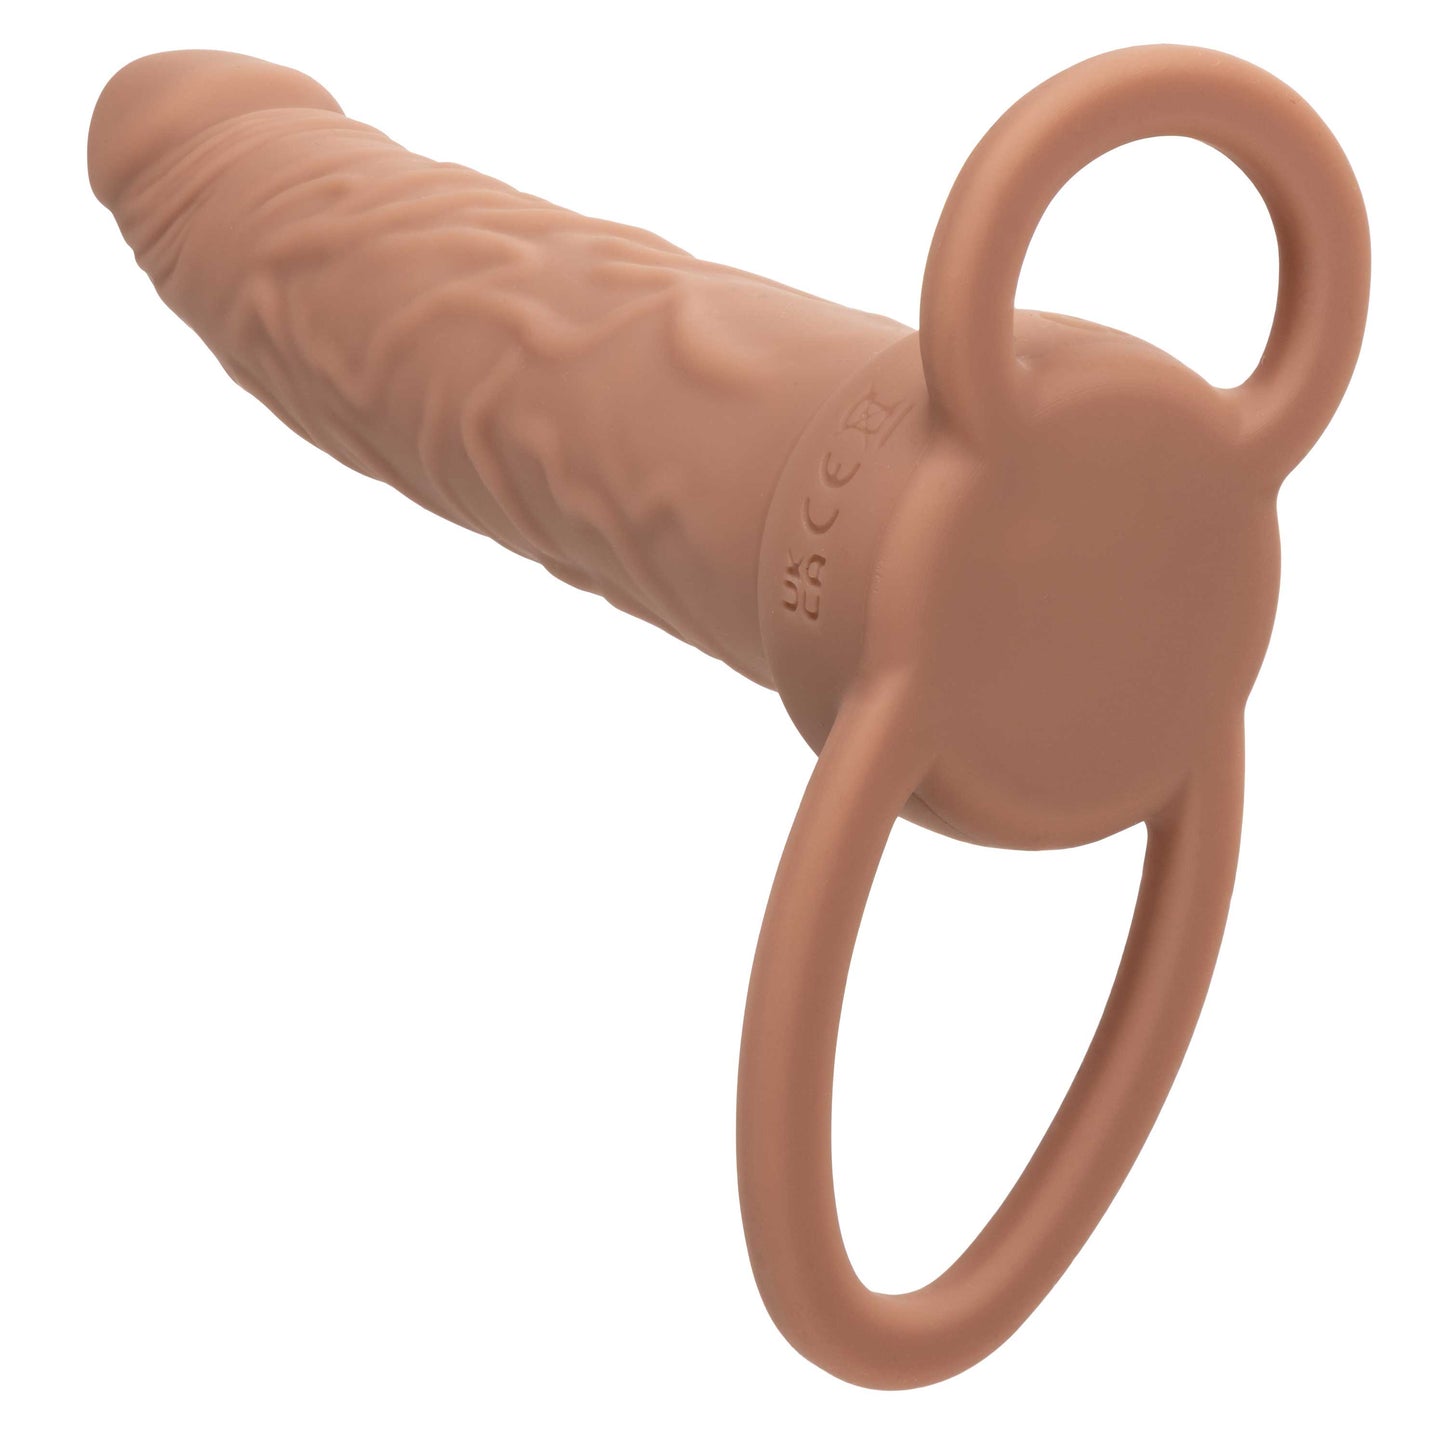 Performance Maxx Rechargeable Dual Penetrator -  Brown